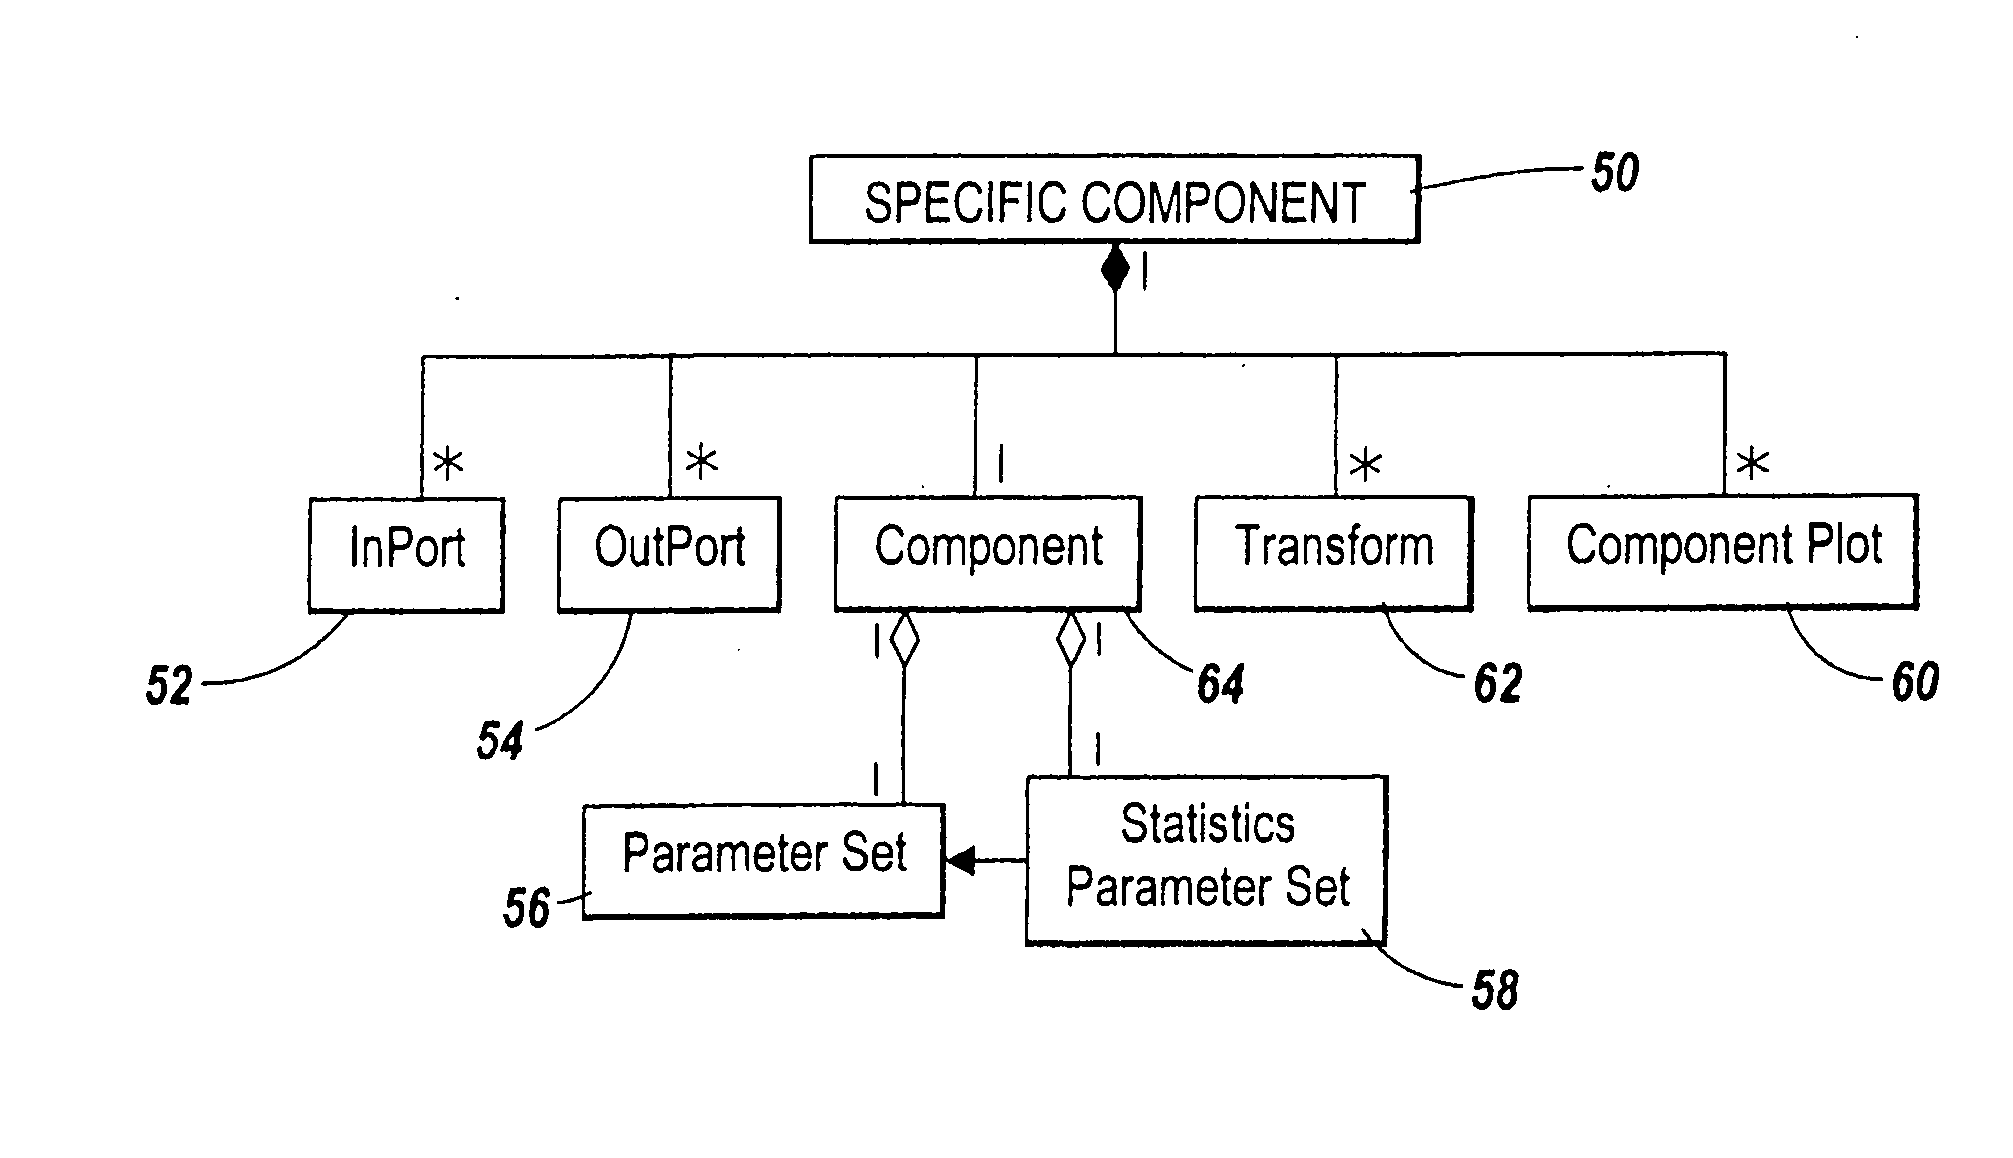 Object-oriented component and framework architecture for signal processing